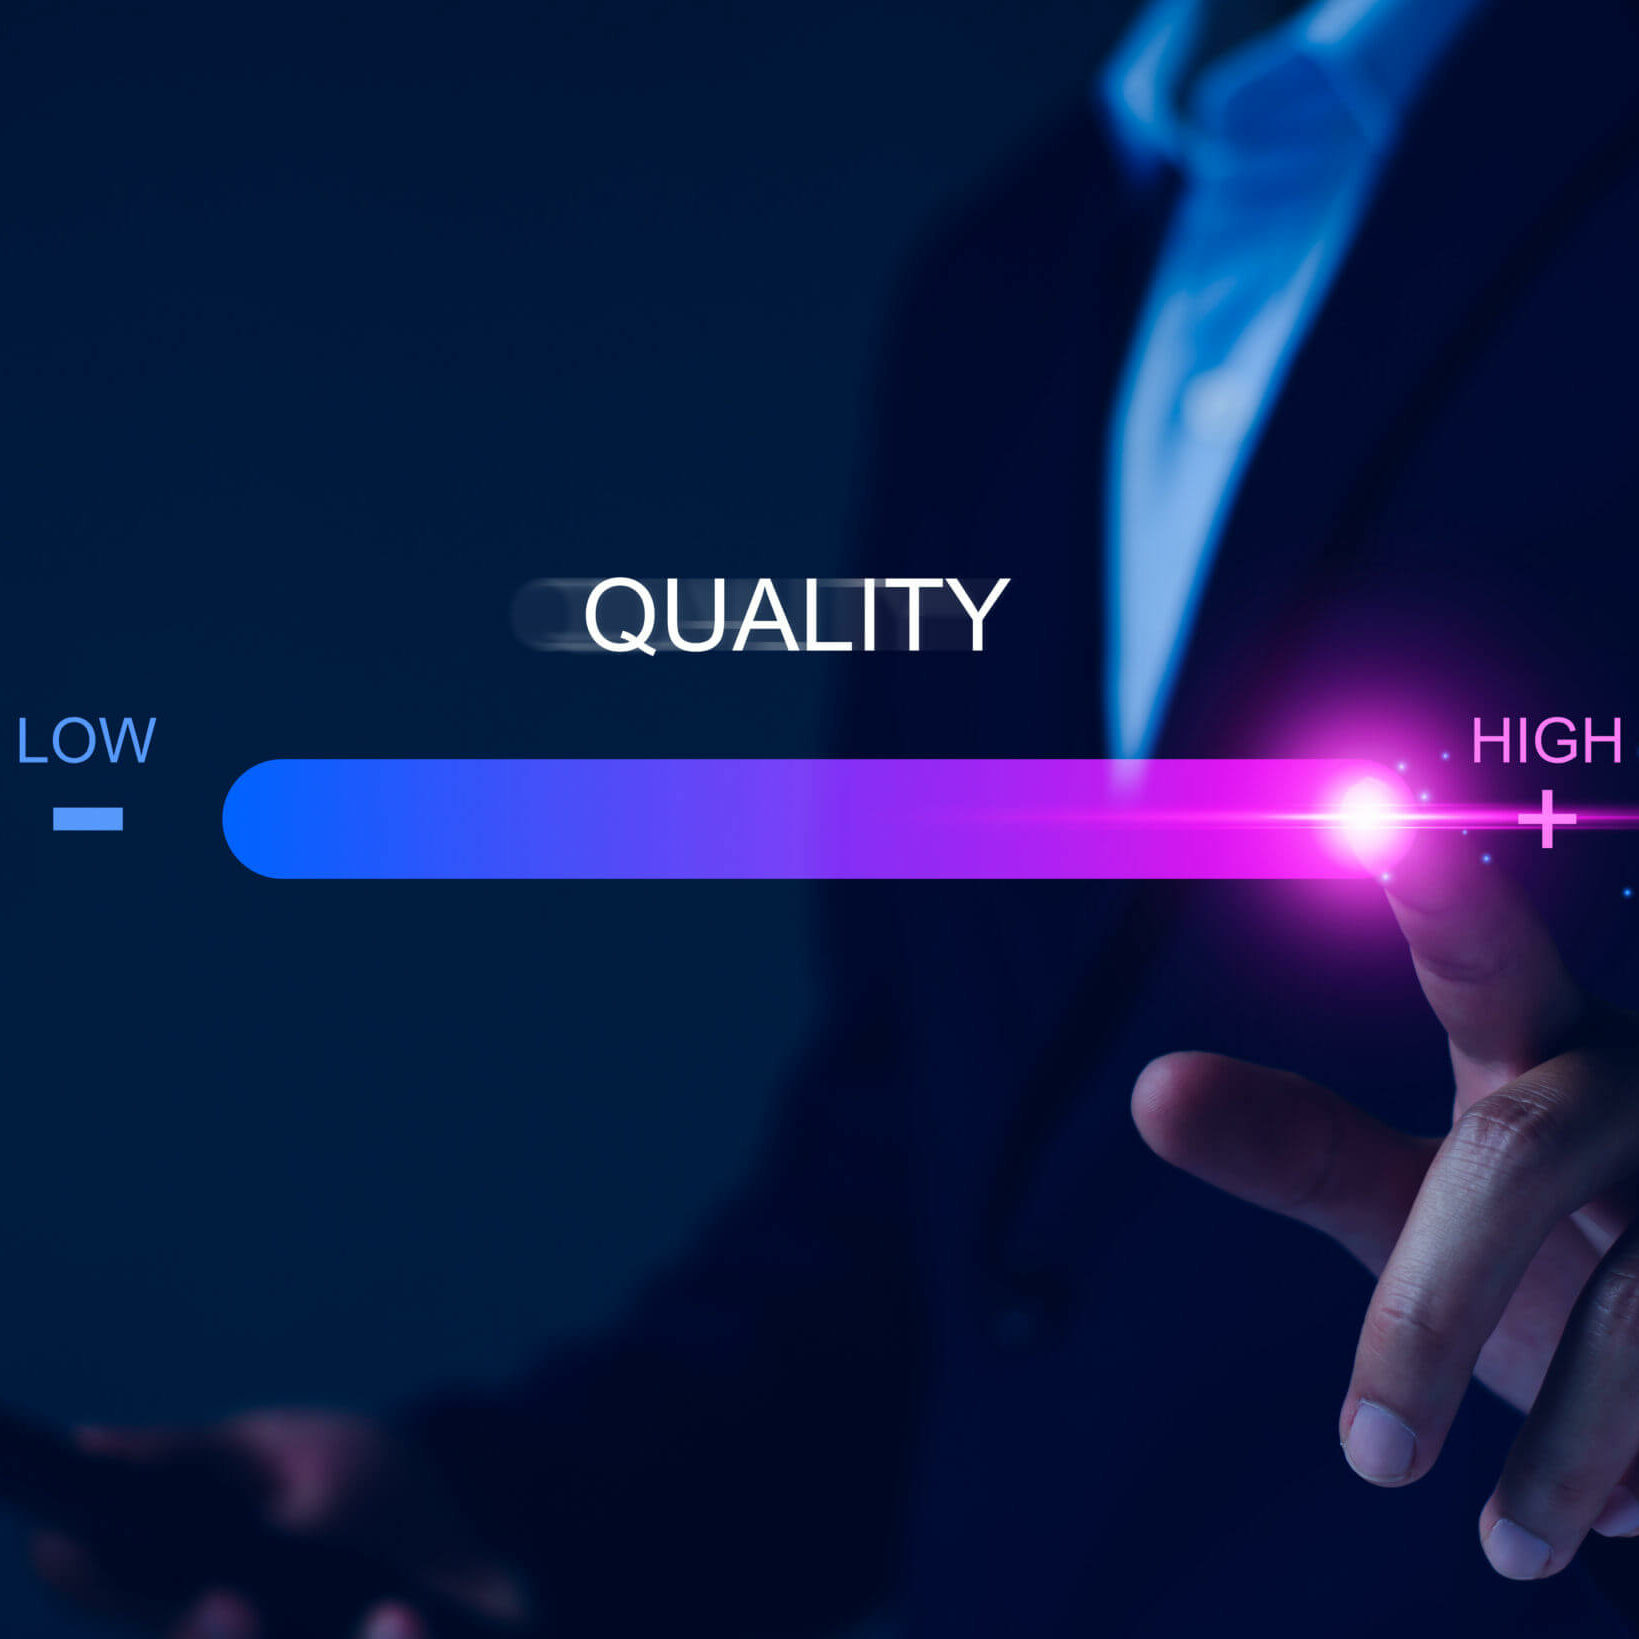 The concept of High-Quality Assurance represented by a mark, signifying premium services, excellent service, and a guarantee of top-notch quality. It involves a certification and standardization process to ensure excellence in the services provided.